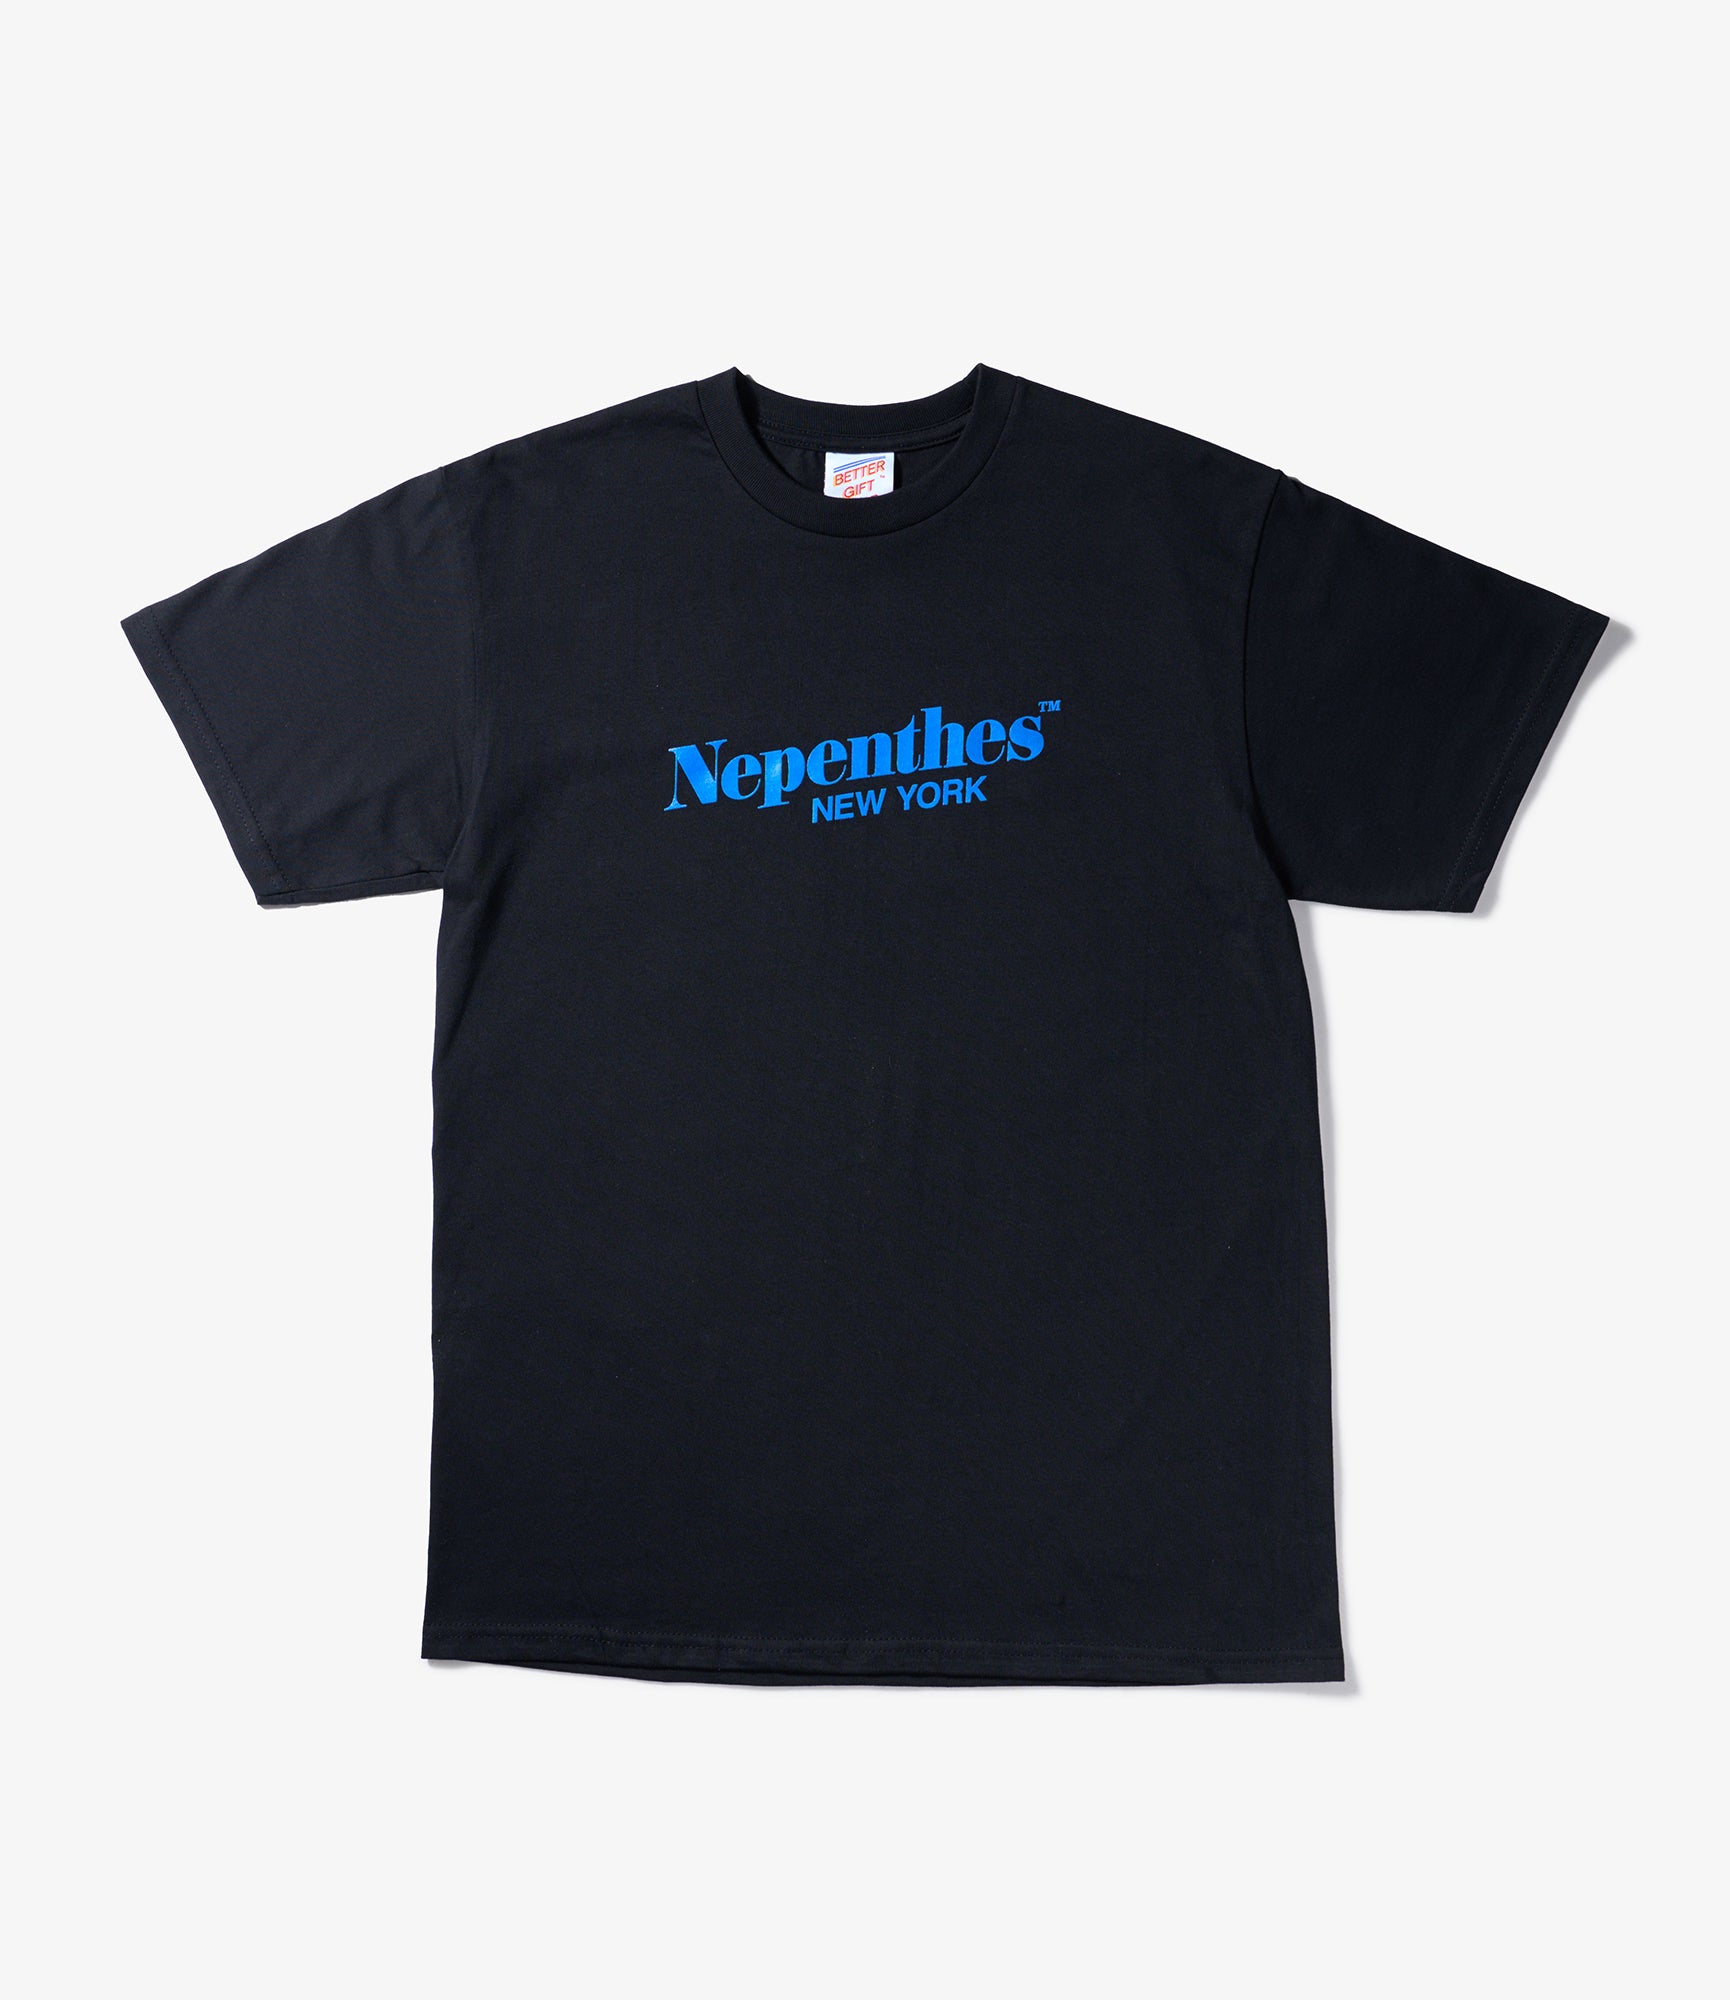 nepenthes ny ネペンテス ニューヨーク 限定 Tシャツ